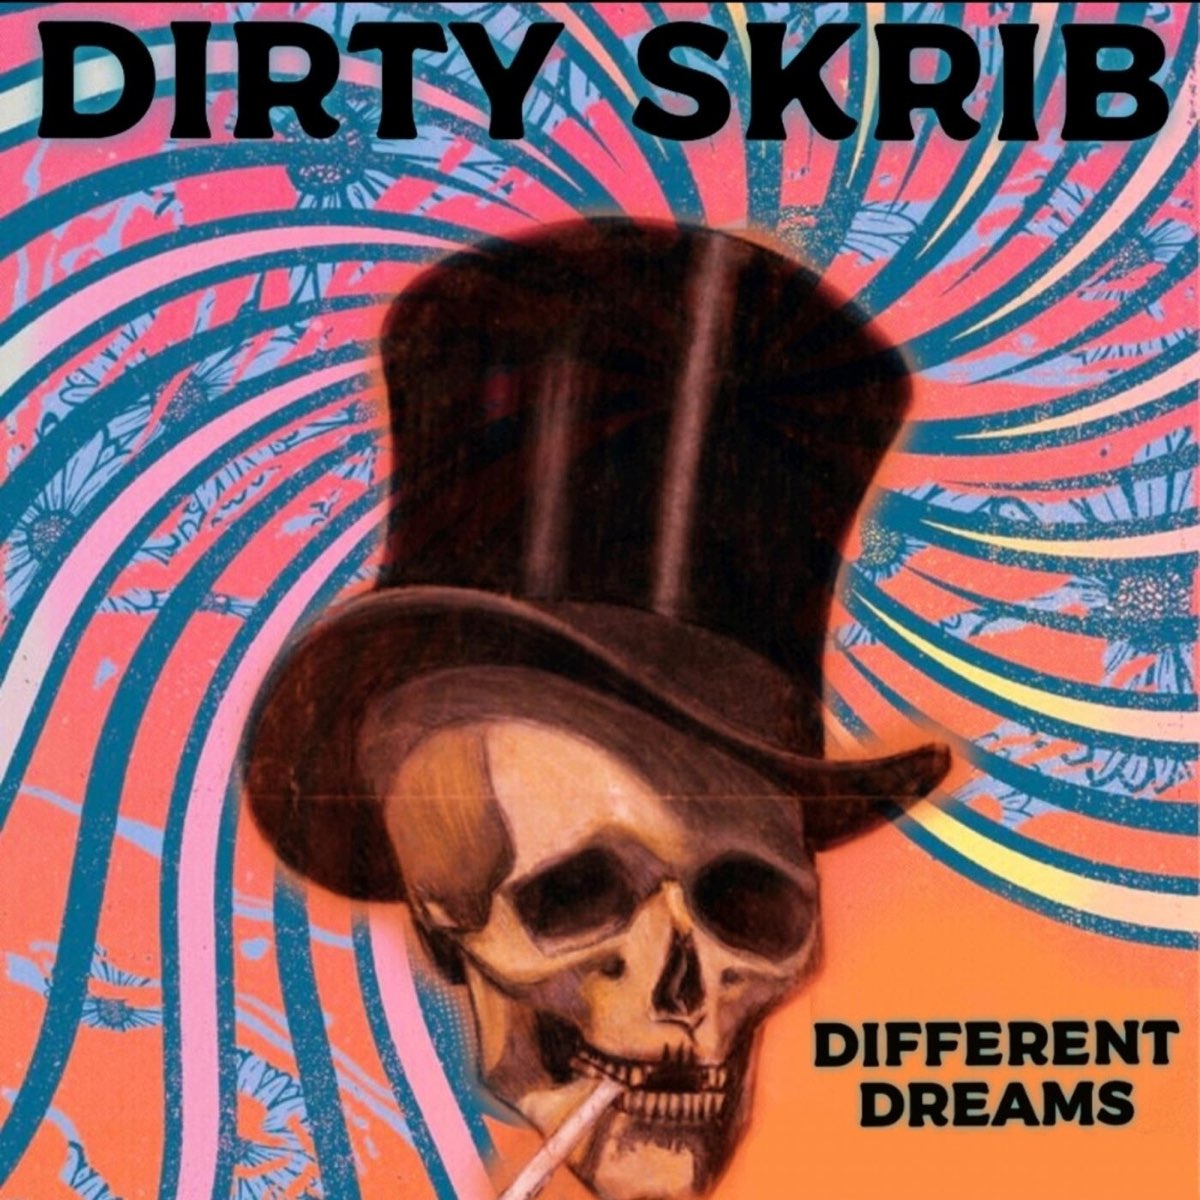 Dirty dreams. Dirty Dream. Different Dreams.